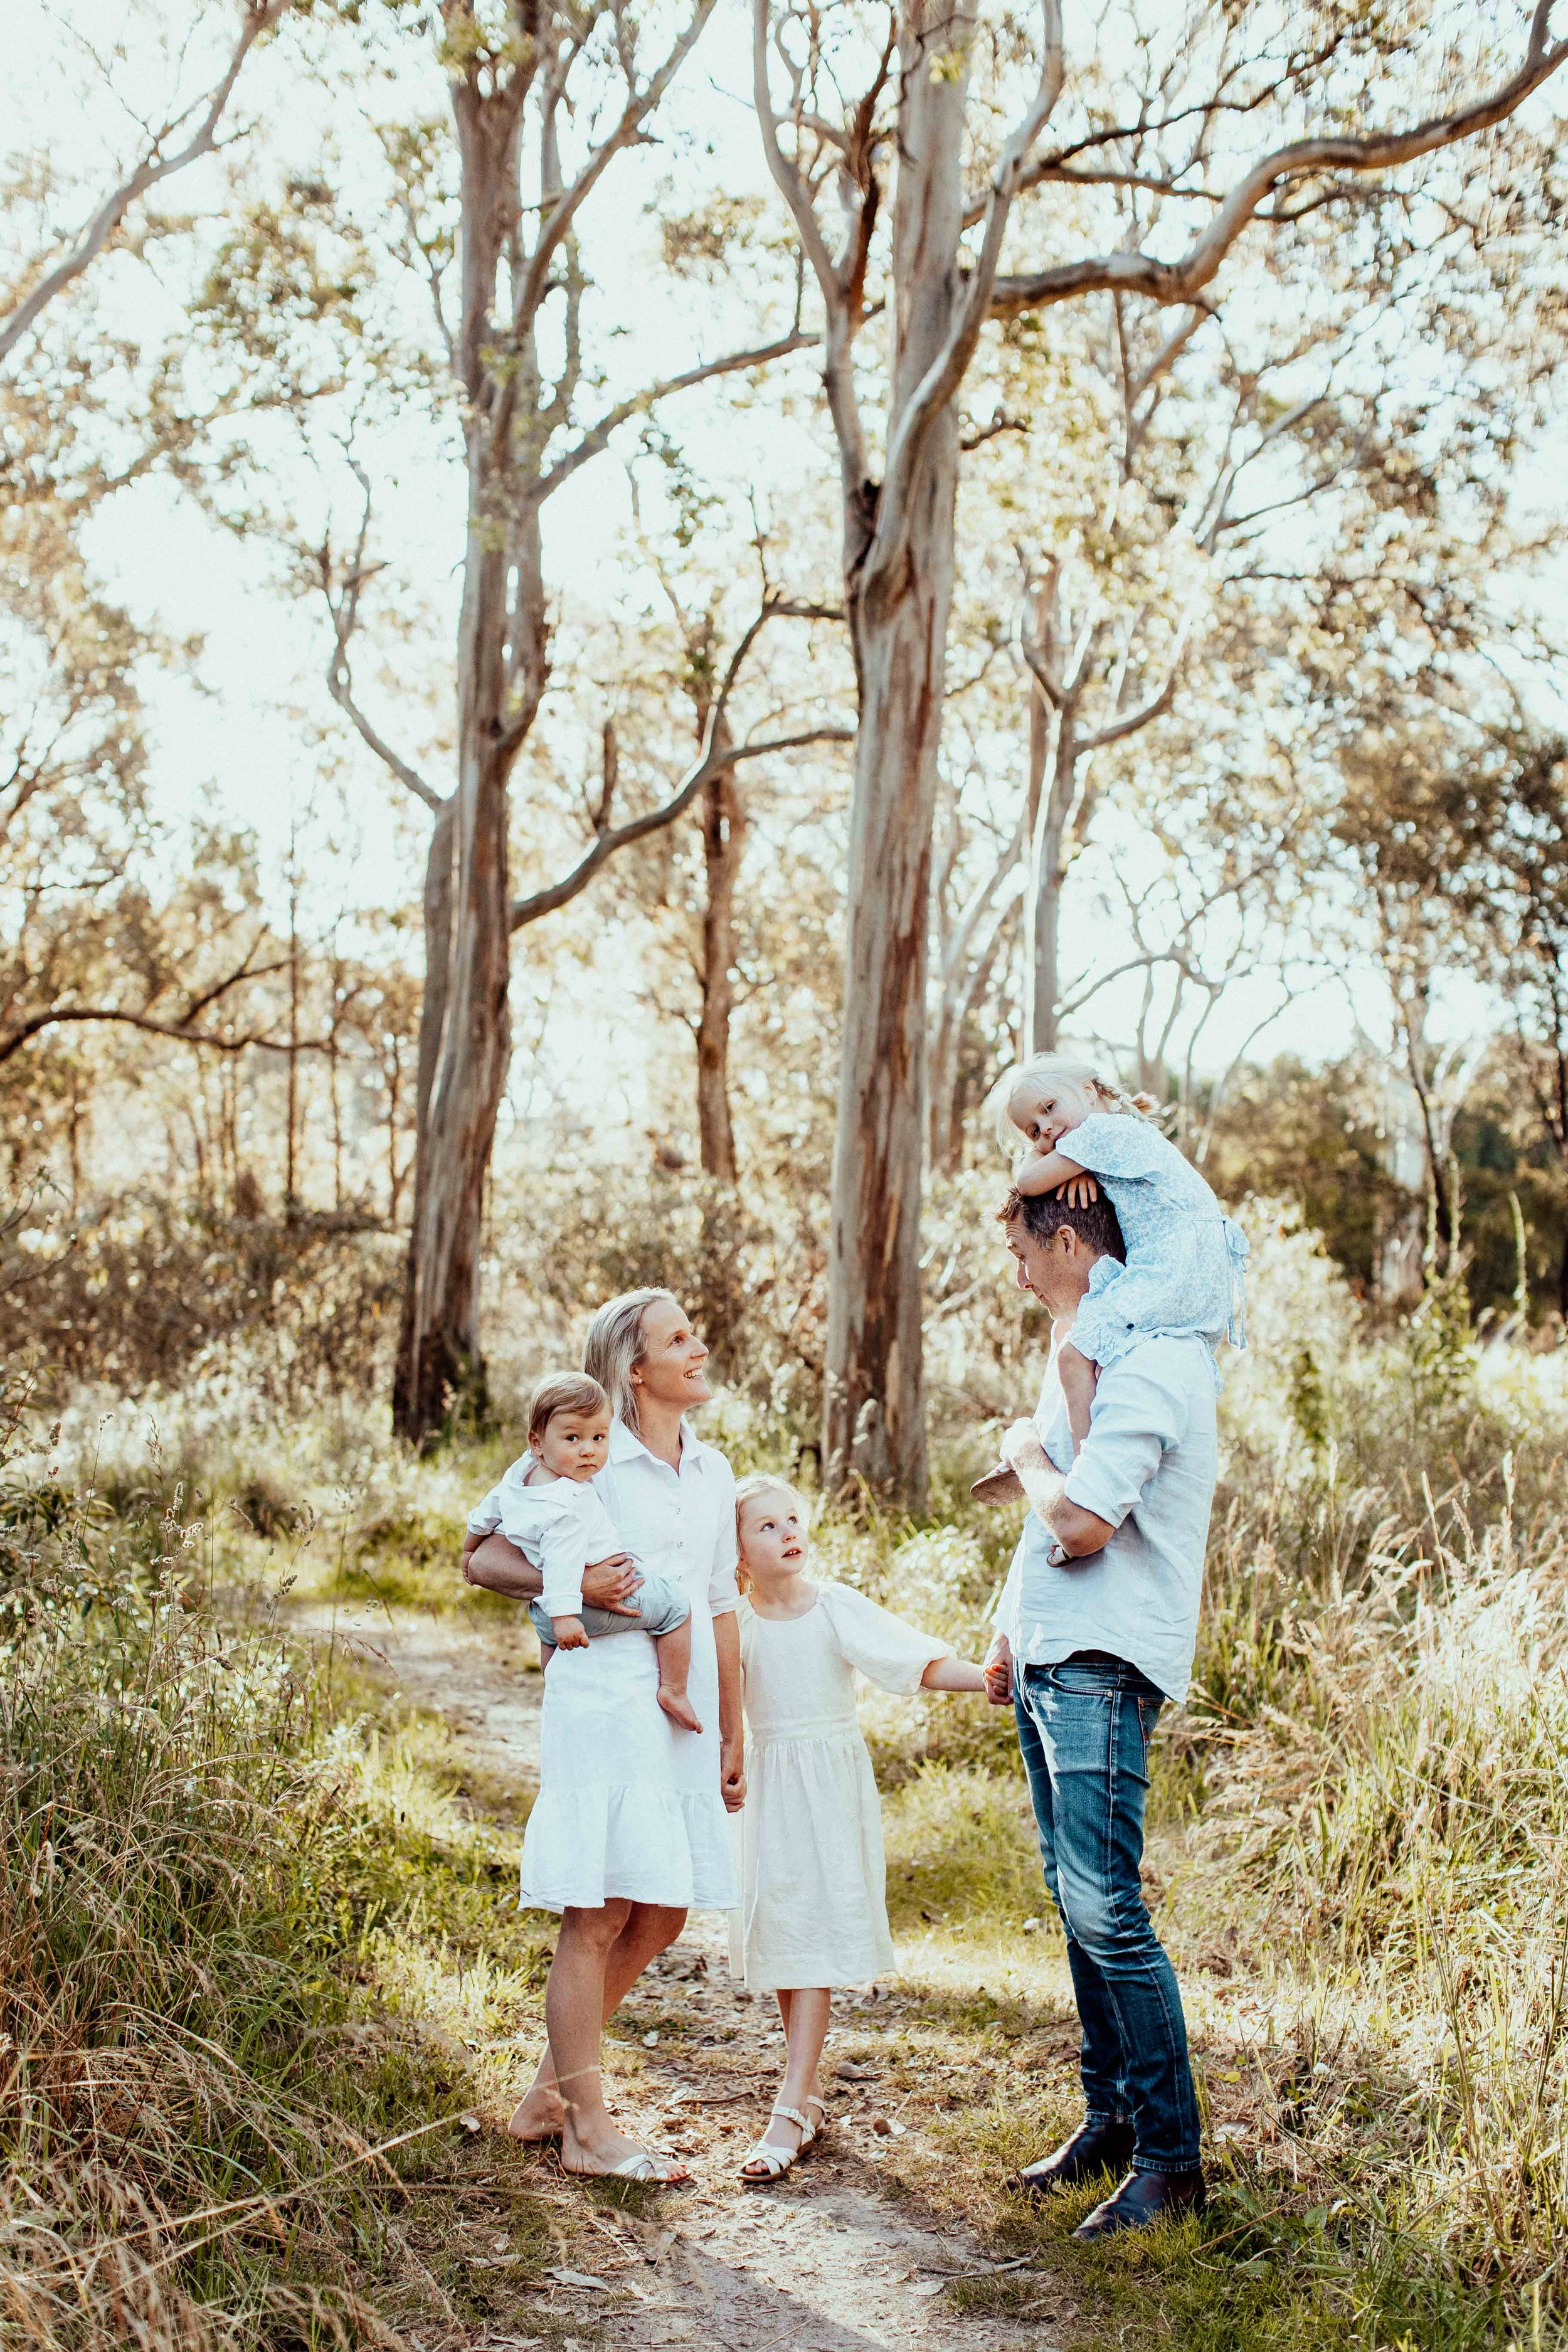 poole-family-bowral-southern-highlands-inhome-family-lifestyle-wollondilly-camden-macarthur-sydney-photography-www.emilyobrienphotography.net-36.jpg